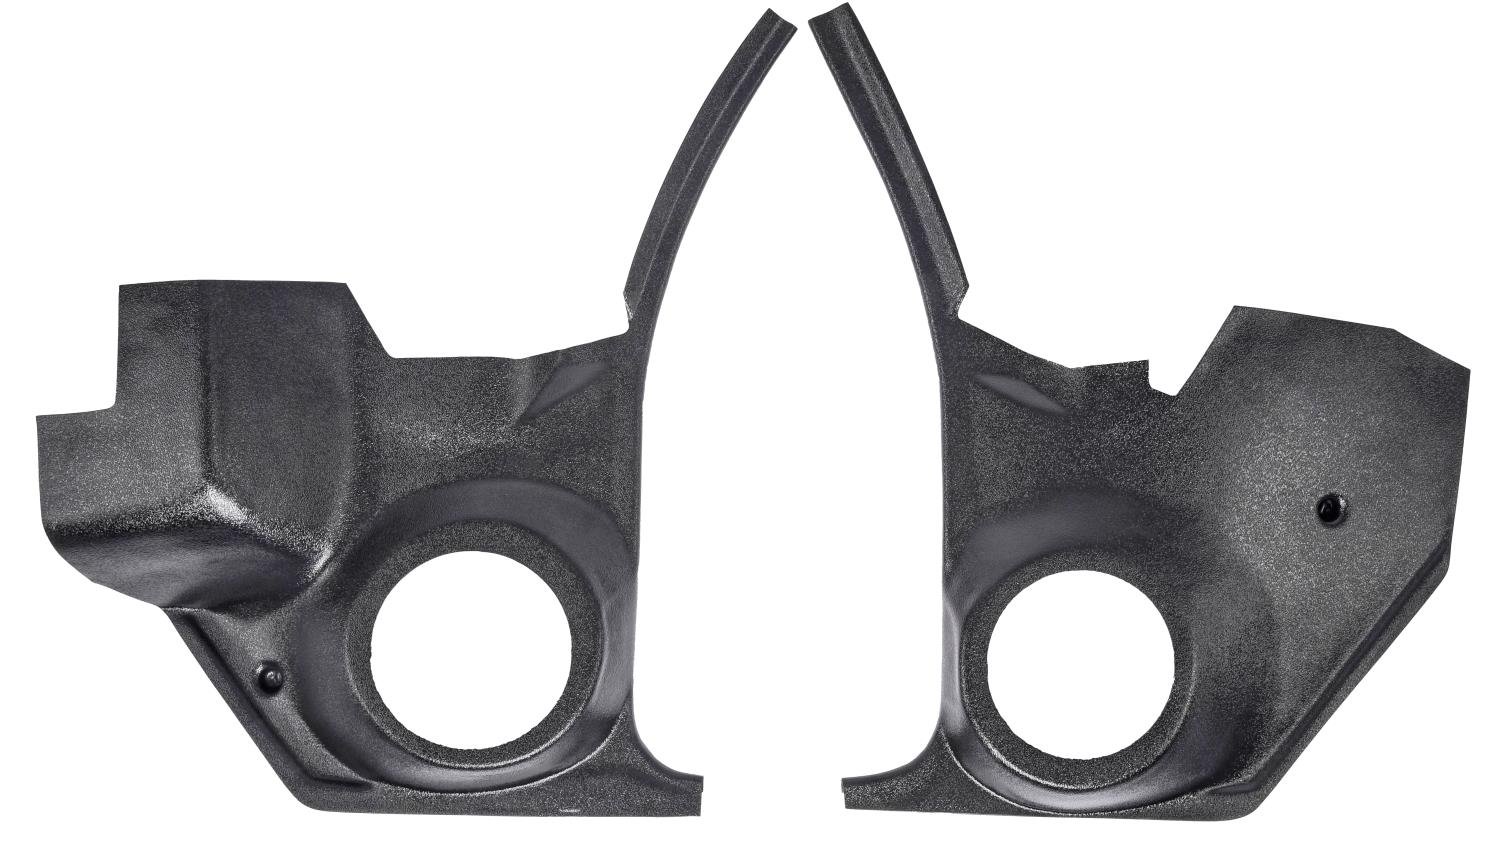 Interior Kick Panels for 1968-1972 Chevrolet, Buick, Oldsmobile, Pontiac Models With A/C [Cutouts for 6 1/2 in. Round Speakers]